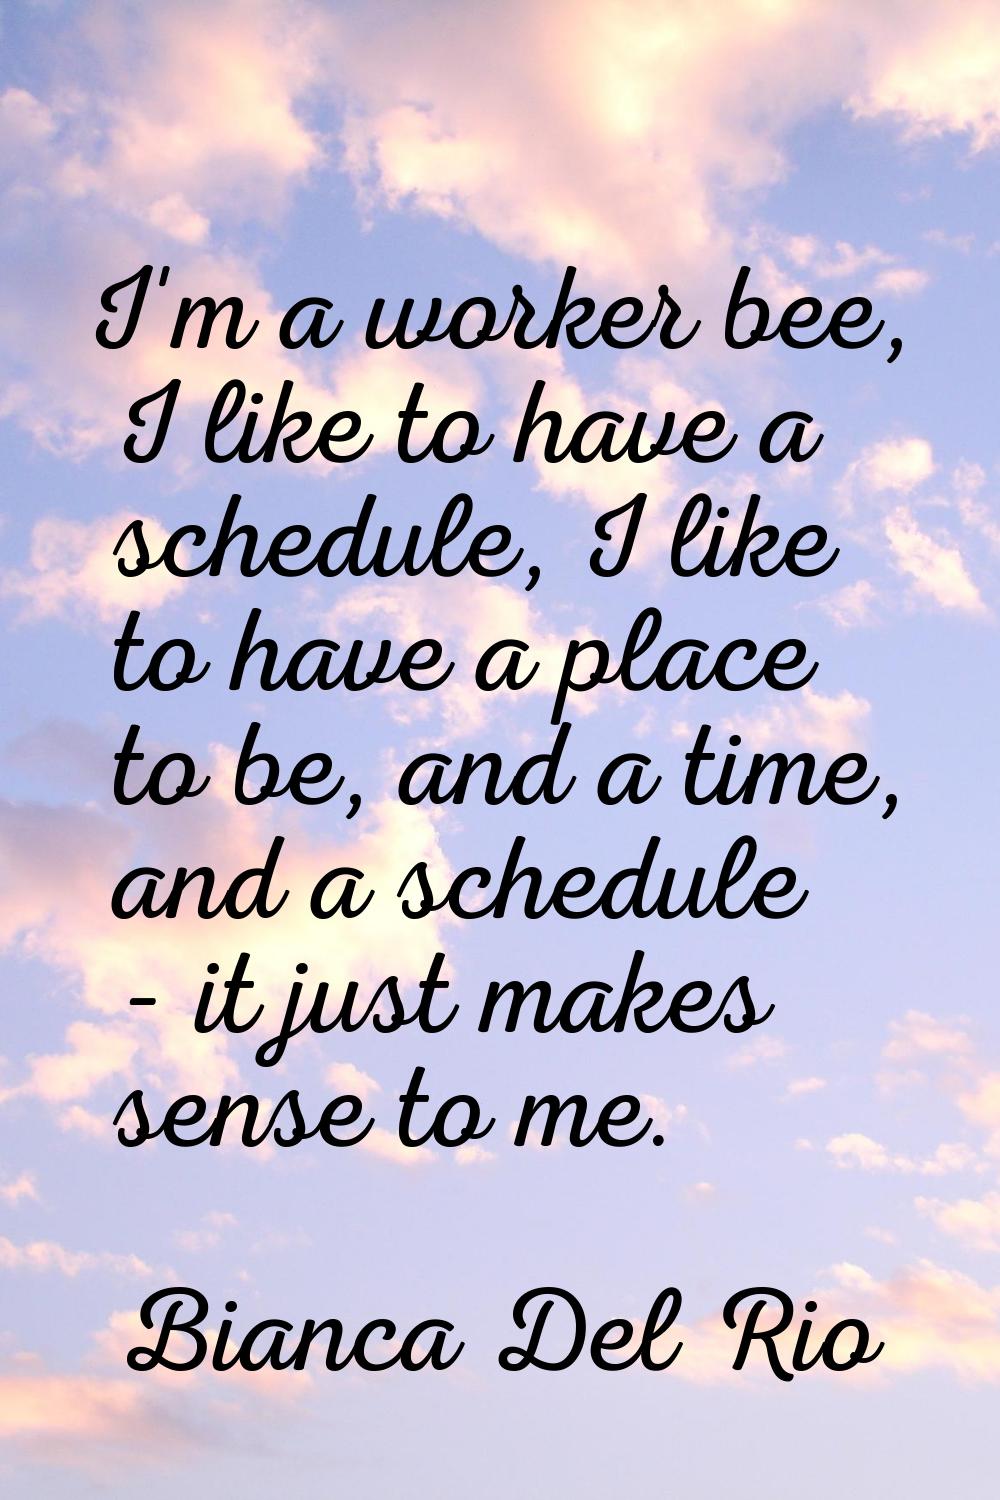 I'm a worker bee, I like to have a schedule, I like to have a place to be, and a time, and a schedu